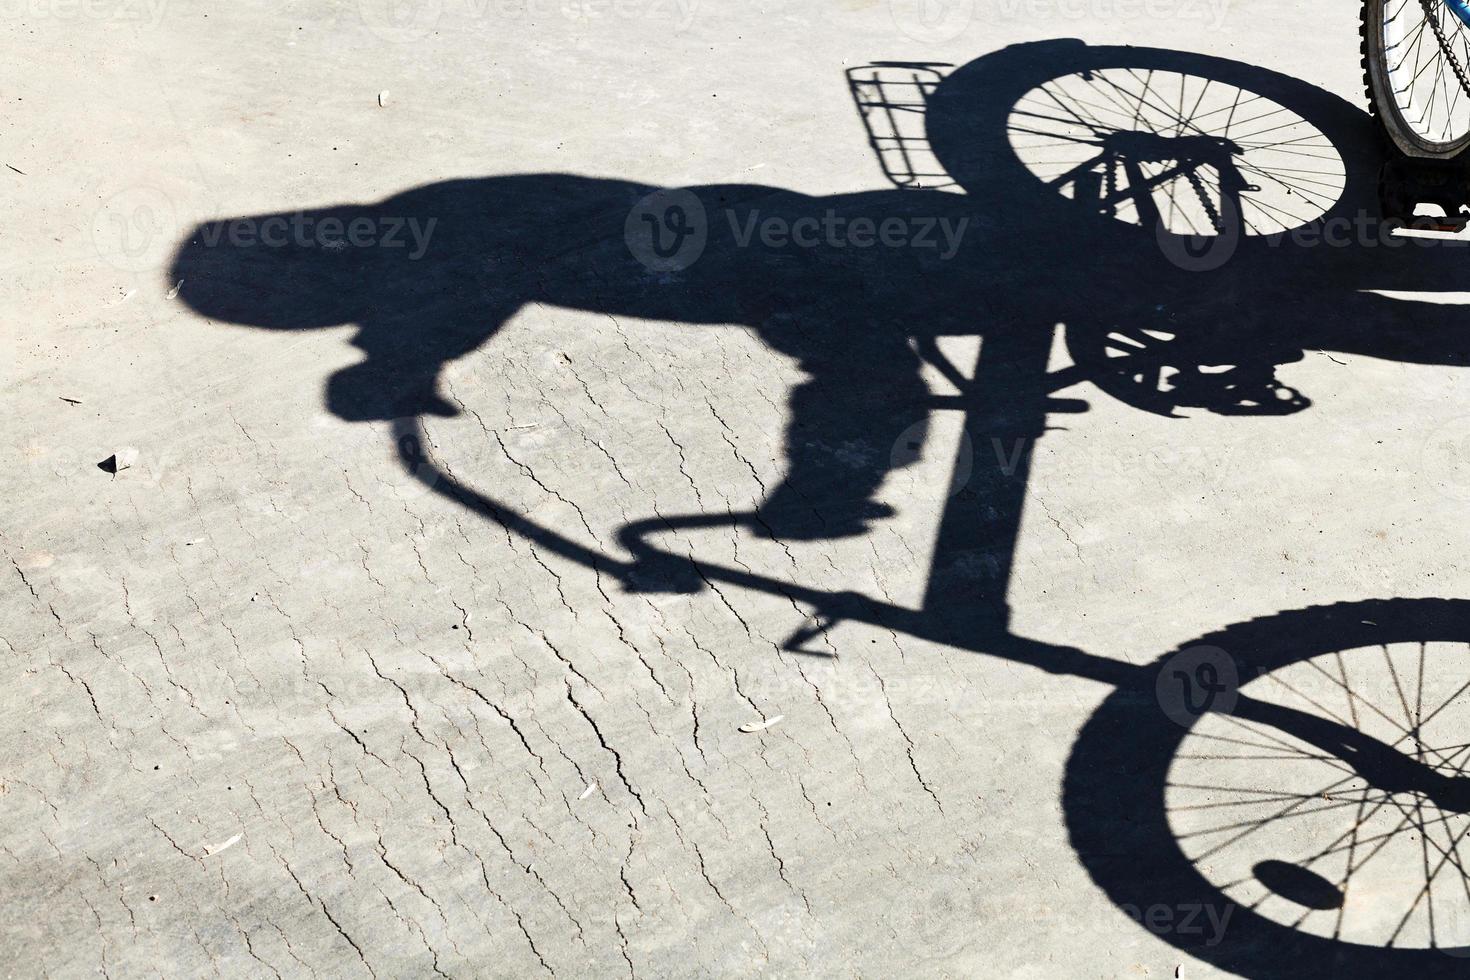 shadow of bicyclist on road photo